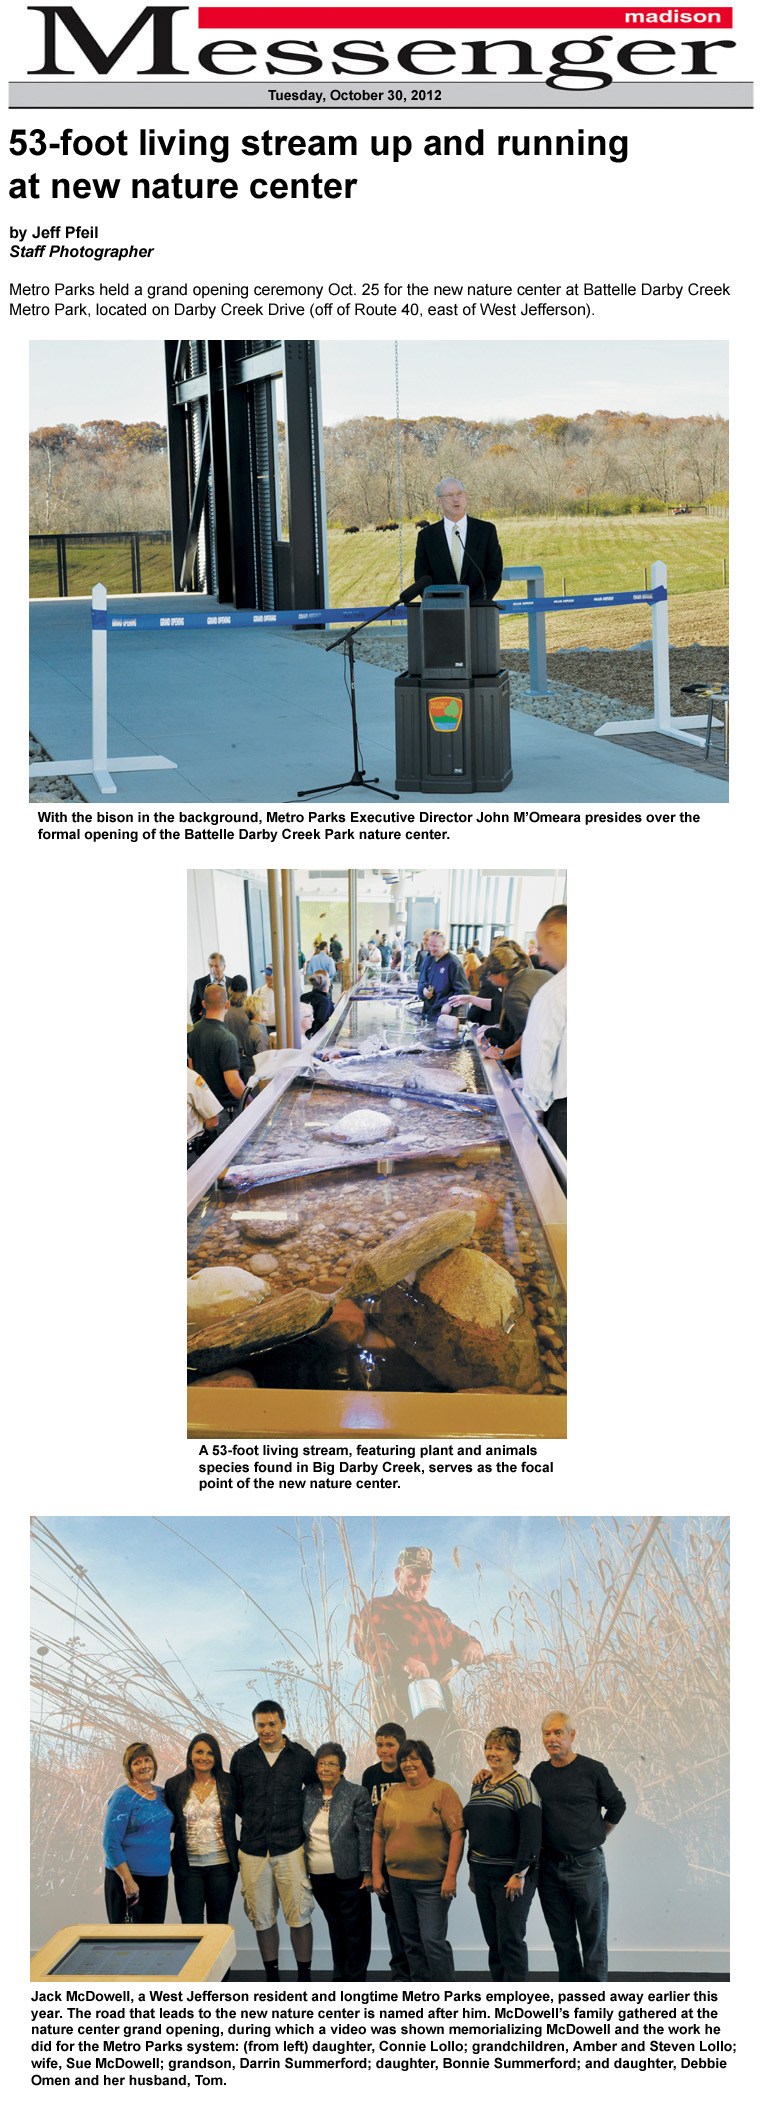 10-30-12 - Madison Messenger article: 53-foot living stream up and running at new nature center